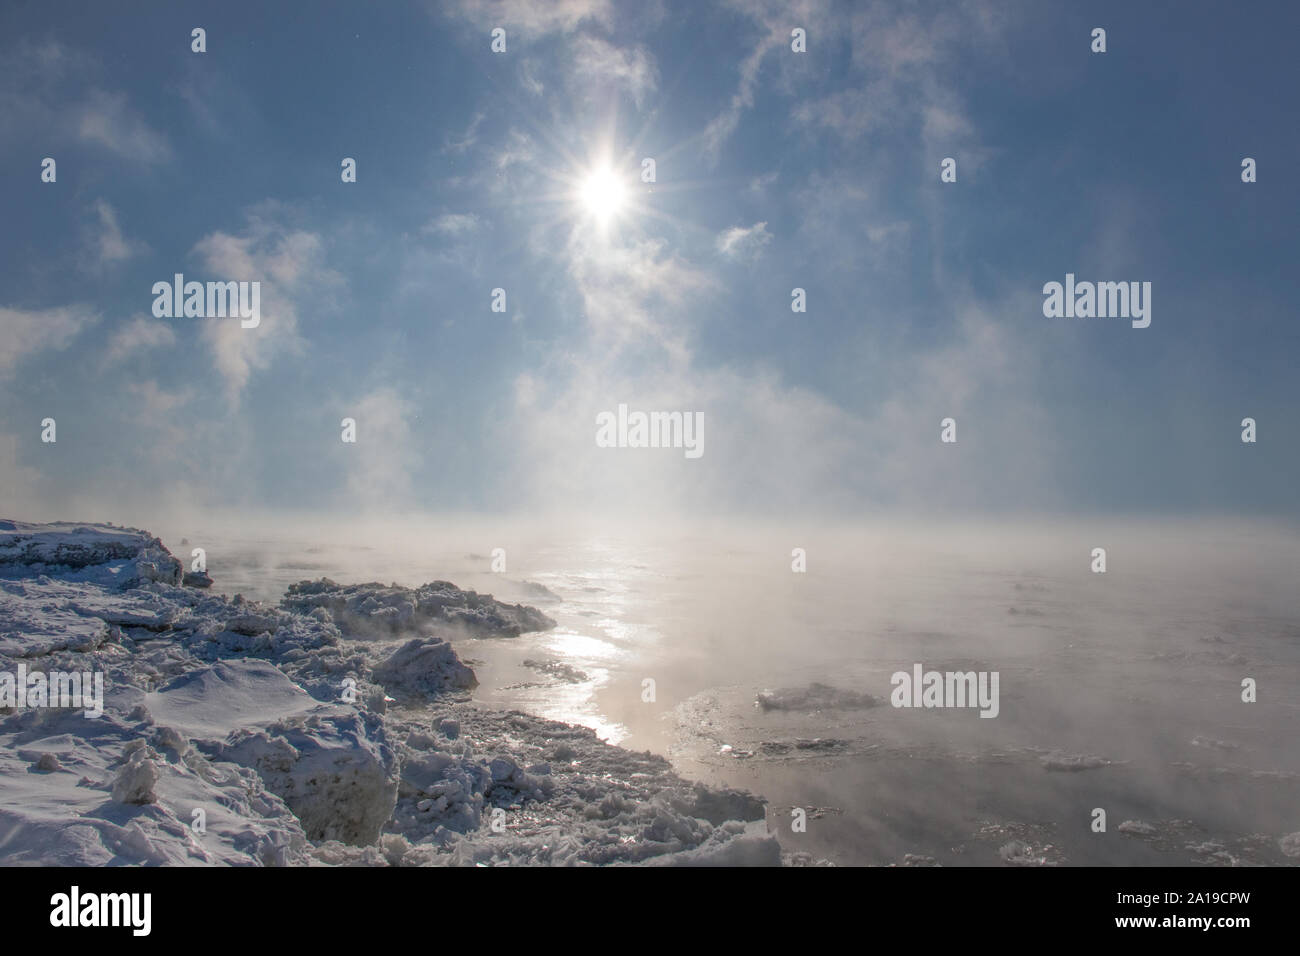 Vapor trails over water on a freezing cold sunny day Stock Photo